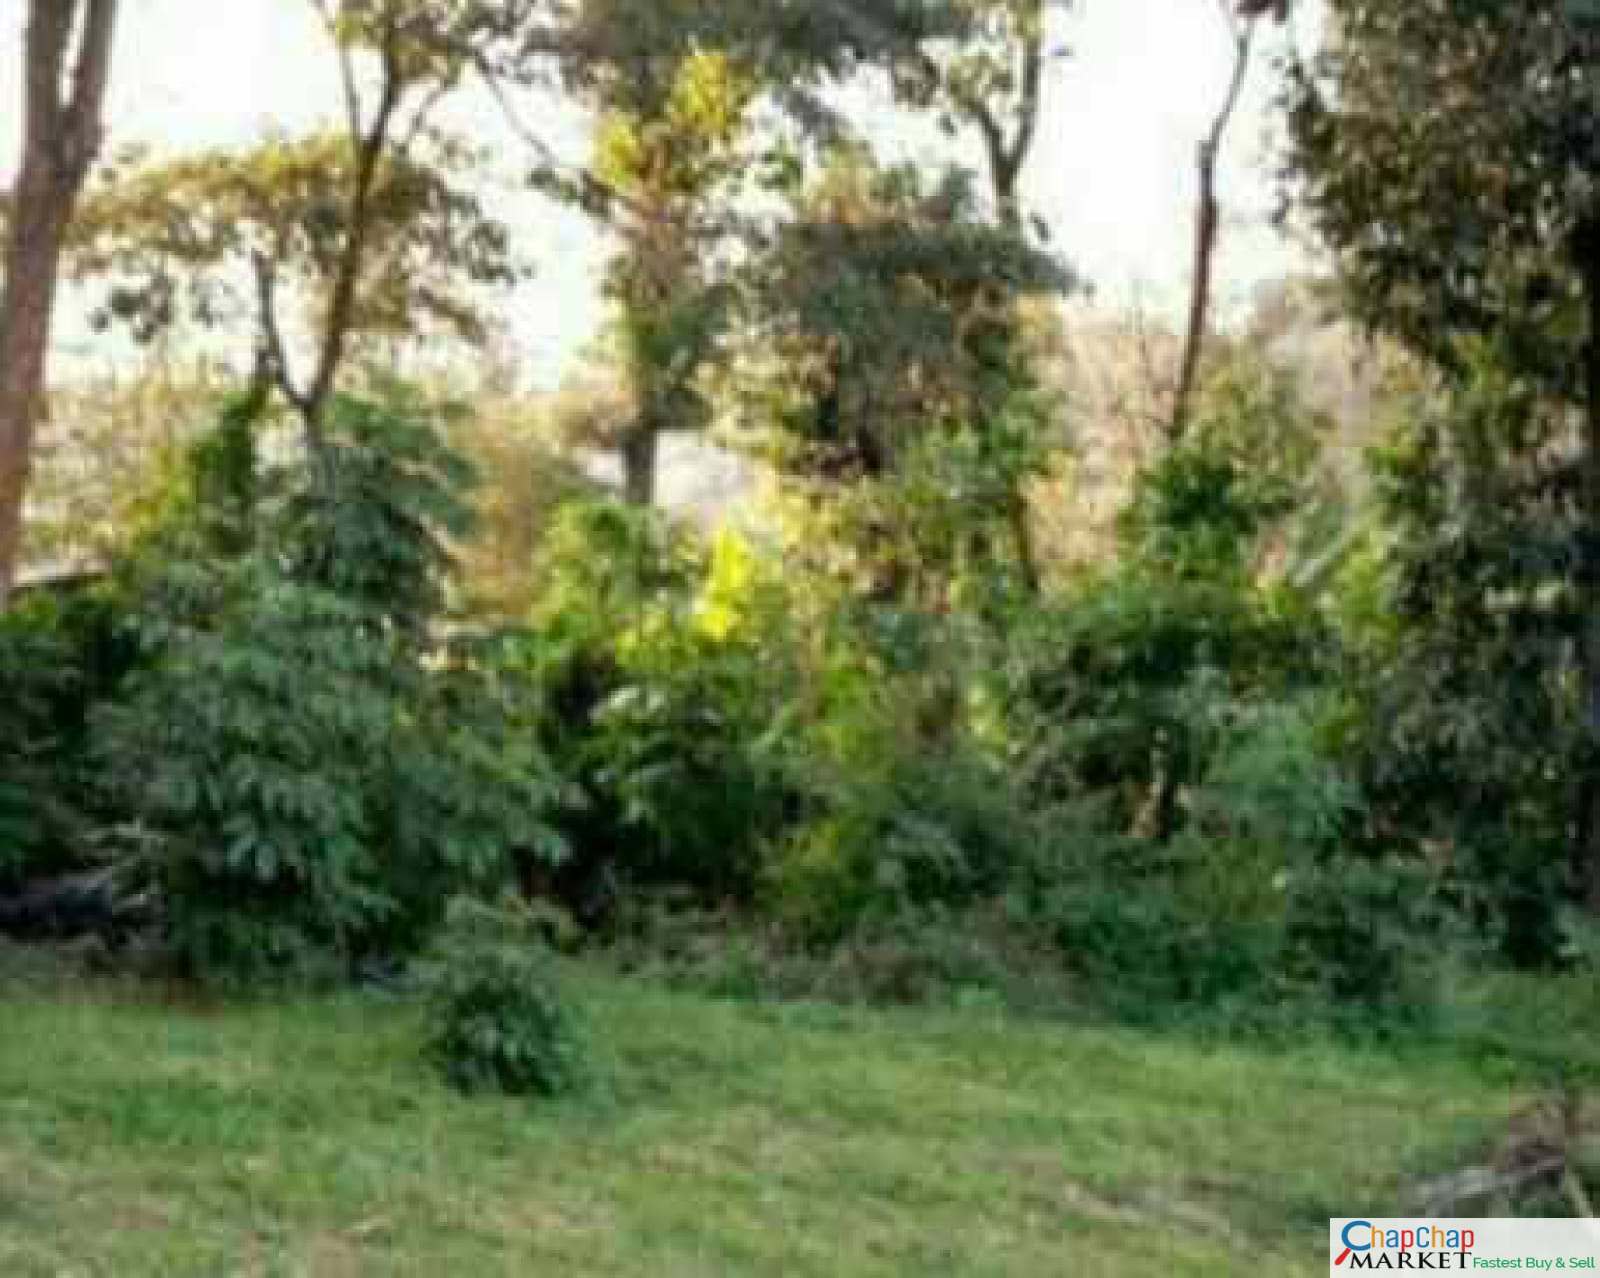 Land For Sale Real Estate-Land for sale in Karen Mokoyeti behind stedmak Half Acre each Ready Title Deed QUICK SALE 1/2 0.5 acre Exclusive 🔥